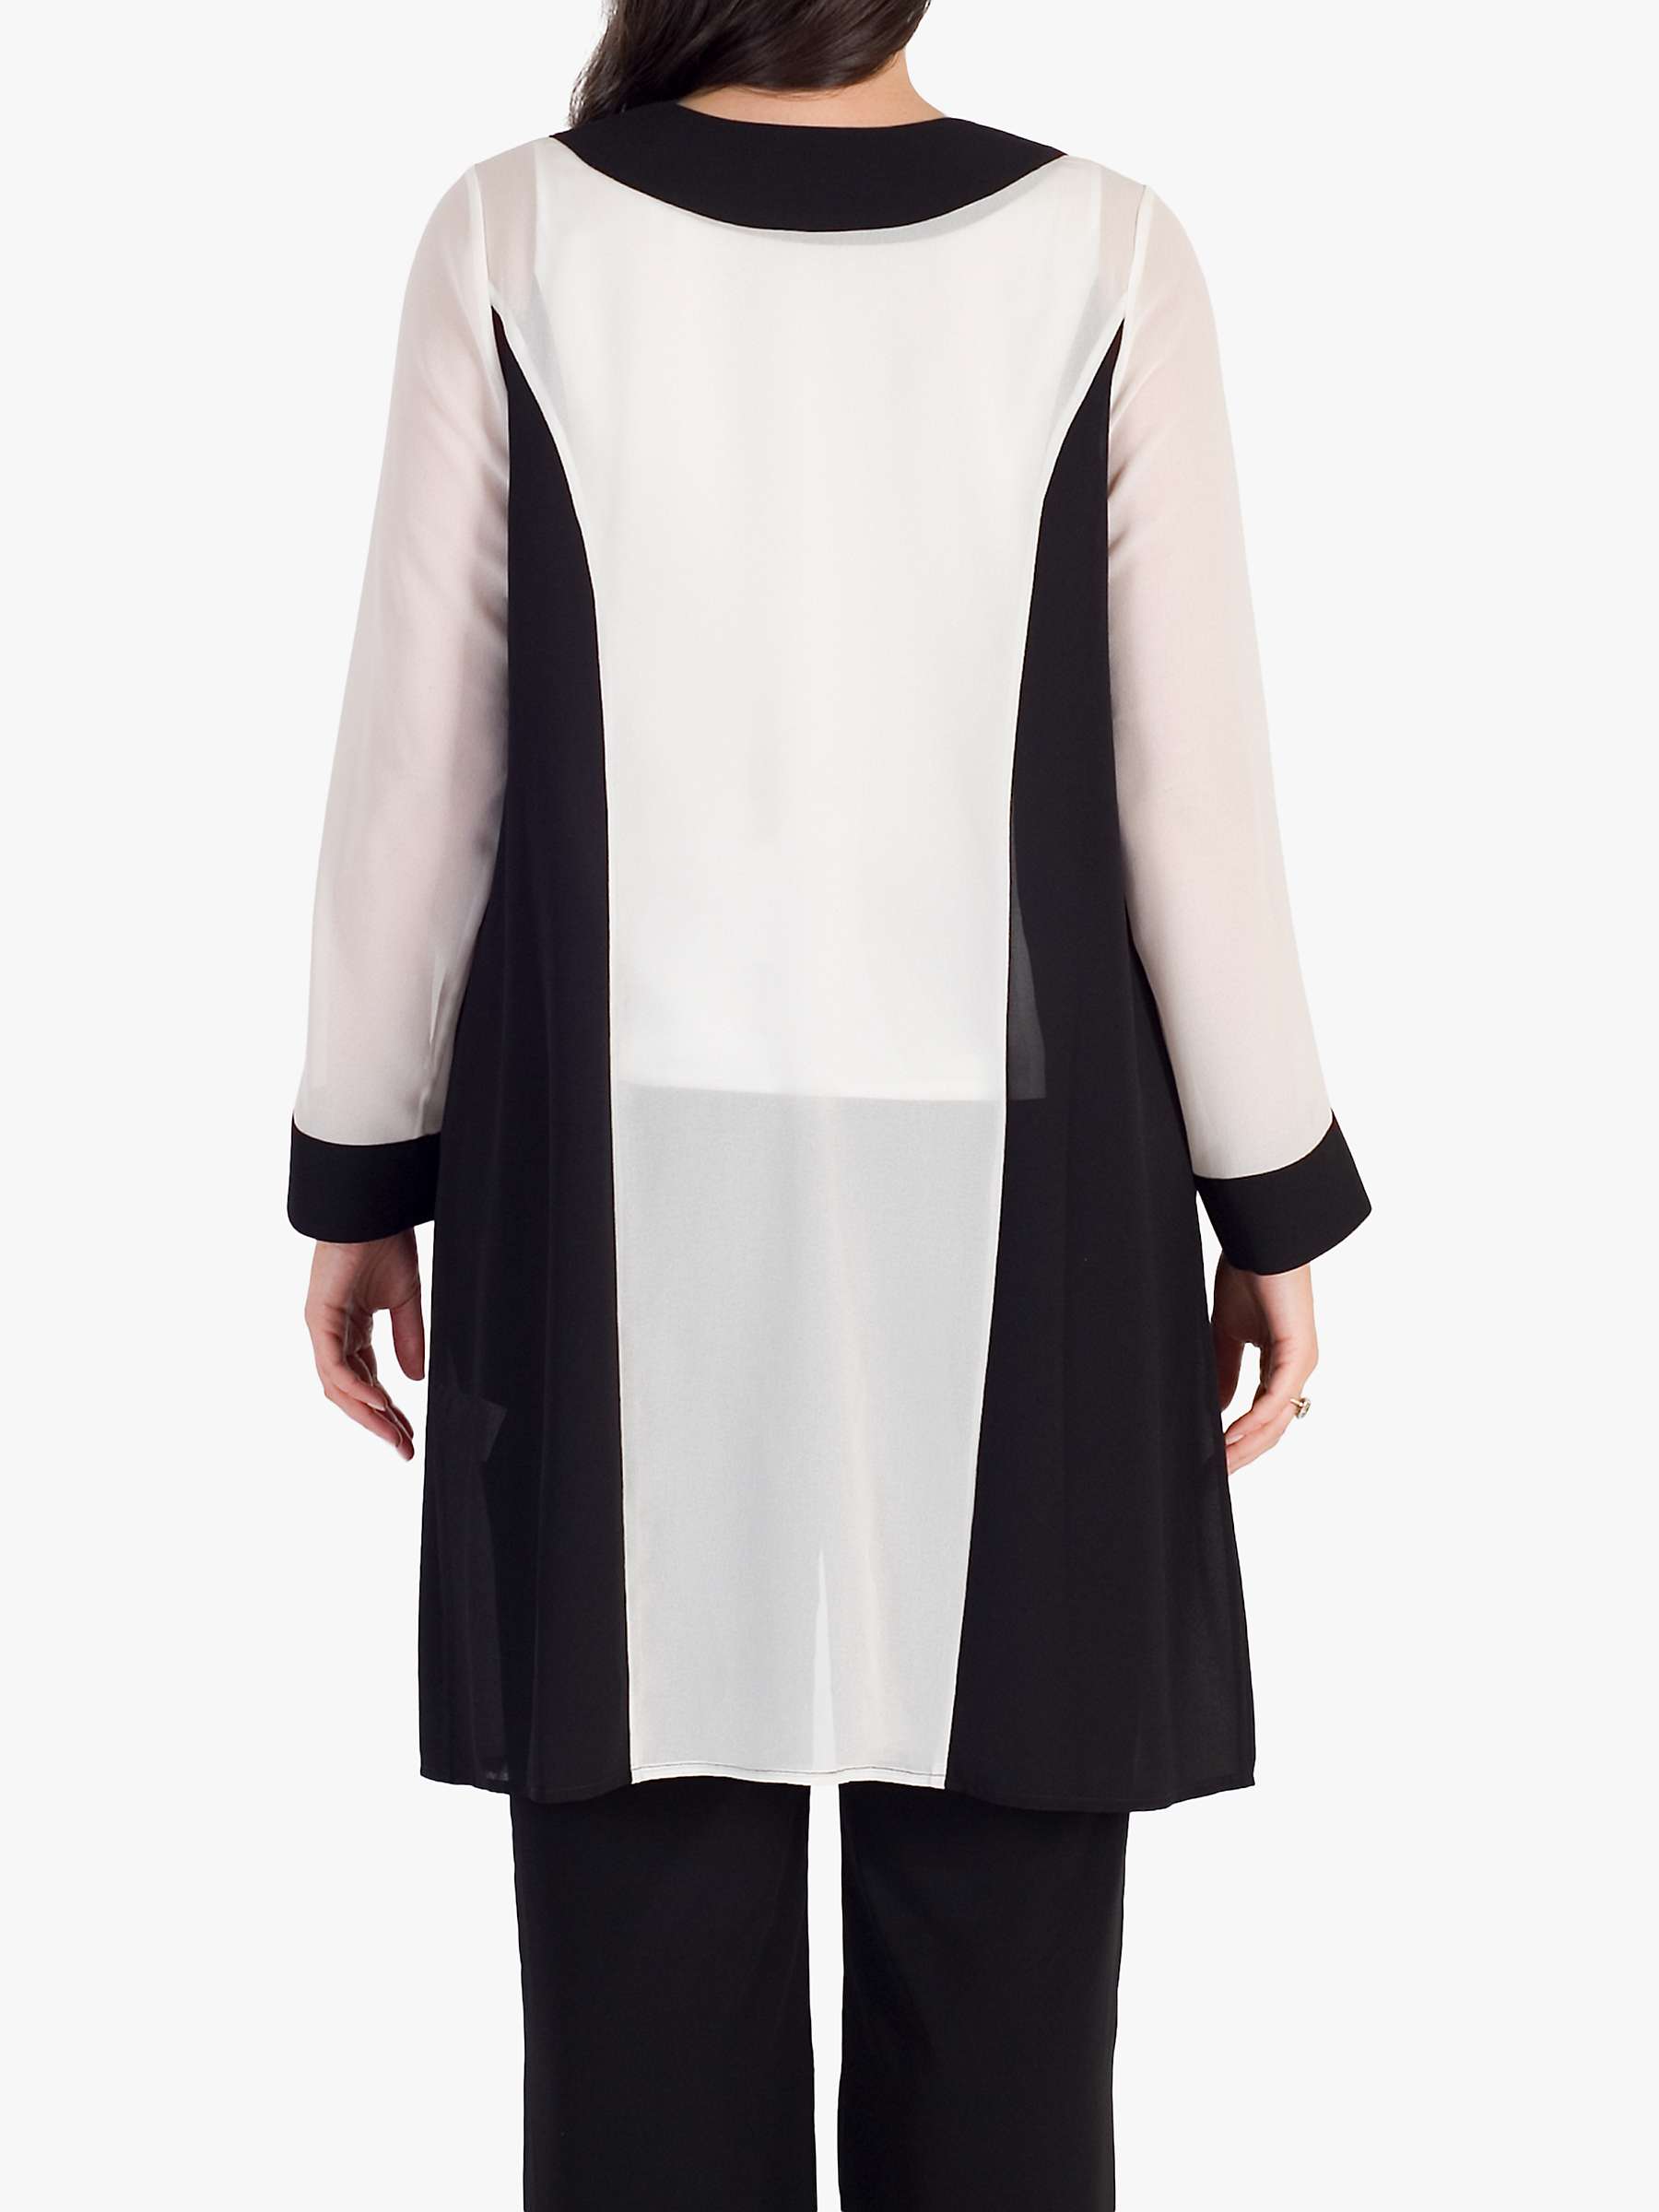 Buy Chesca Contrast Trim Embroidered Chiffon Coat, Black/Ivory Online at johnlewis.com